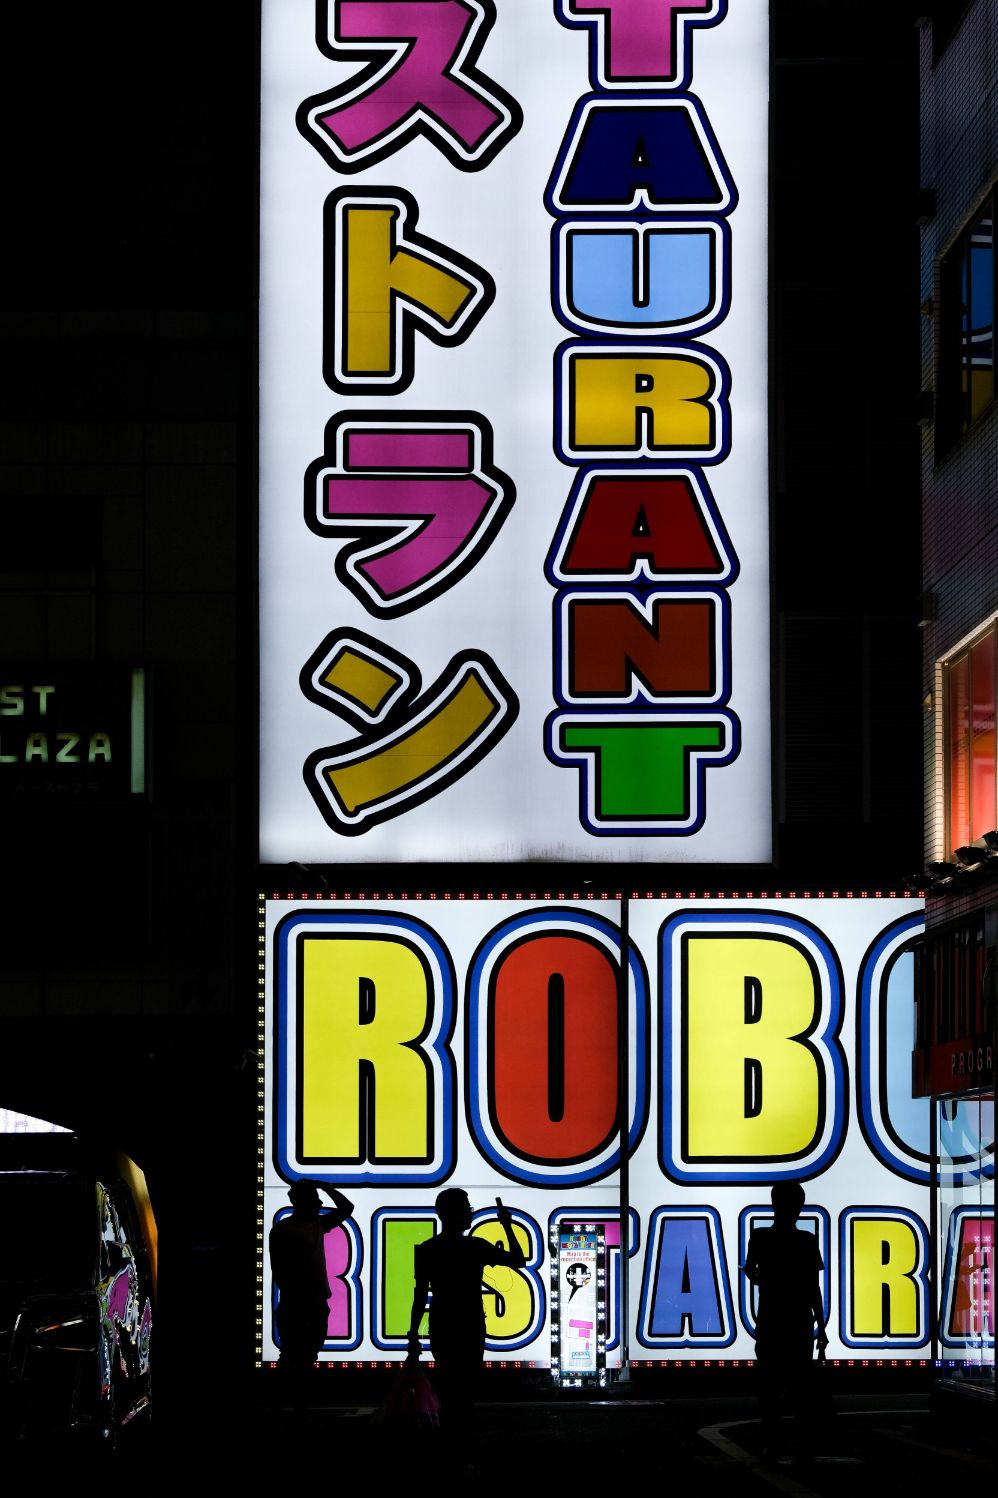 Robot restaurant is well known tourist attraction but the neon sign placed outside is equally worth taking pictures.